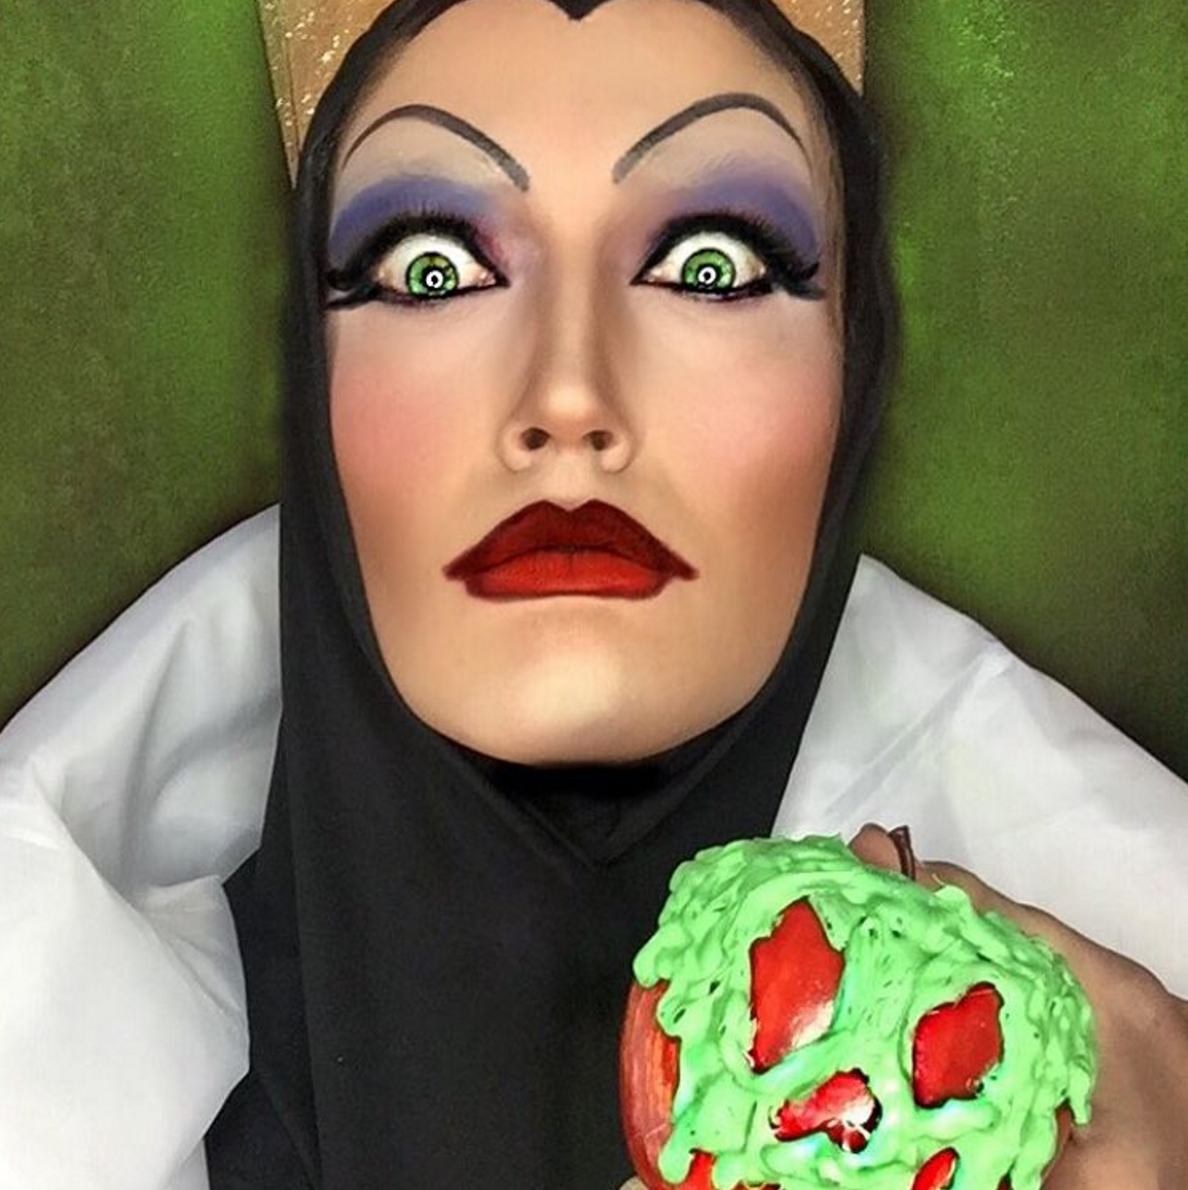 Professional Makeup Artist Perfectly Transforms Herself Into Fictional